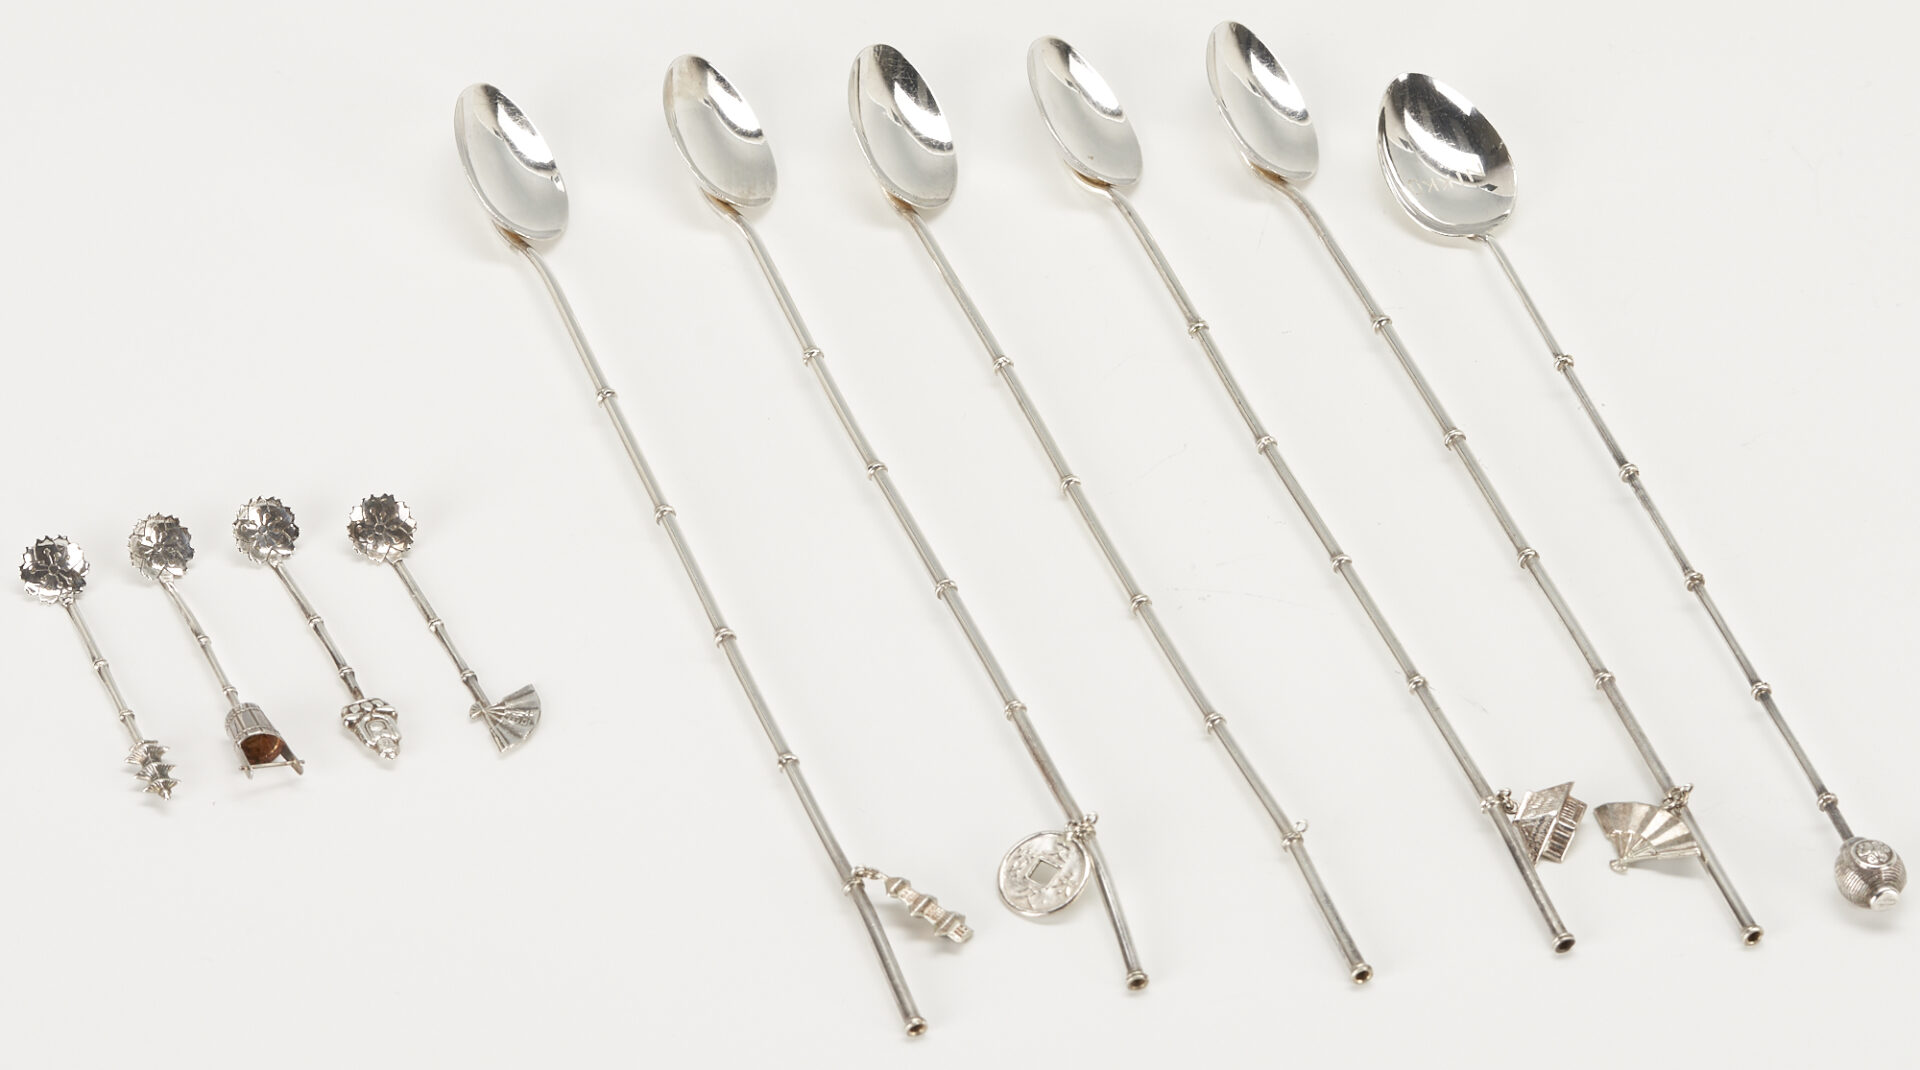 Lot 239: 15 Japanese Silver Items, incl. K. Uyeda .950 & Iced Tea Spoons